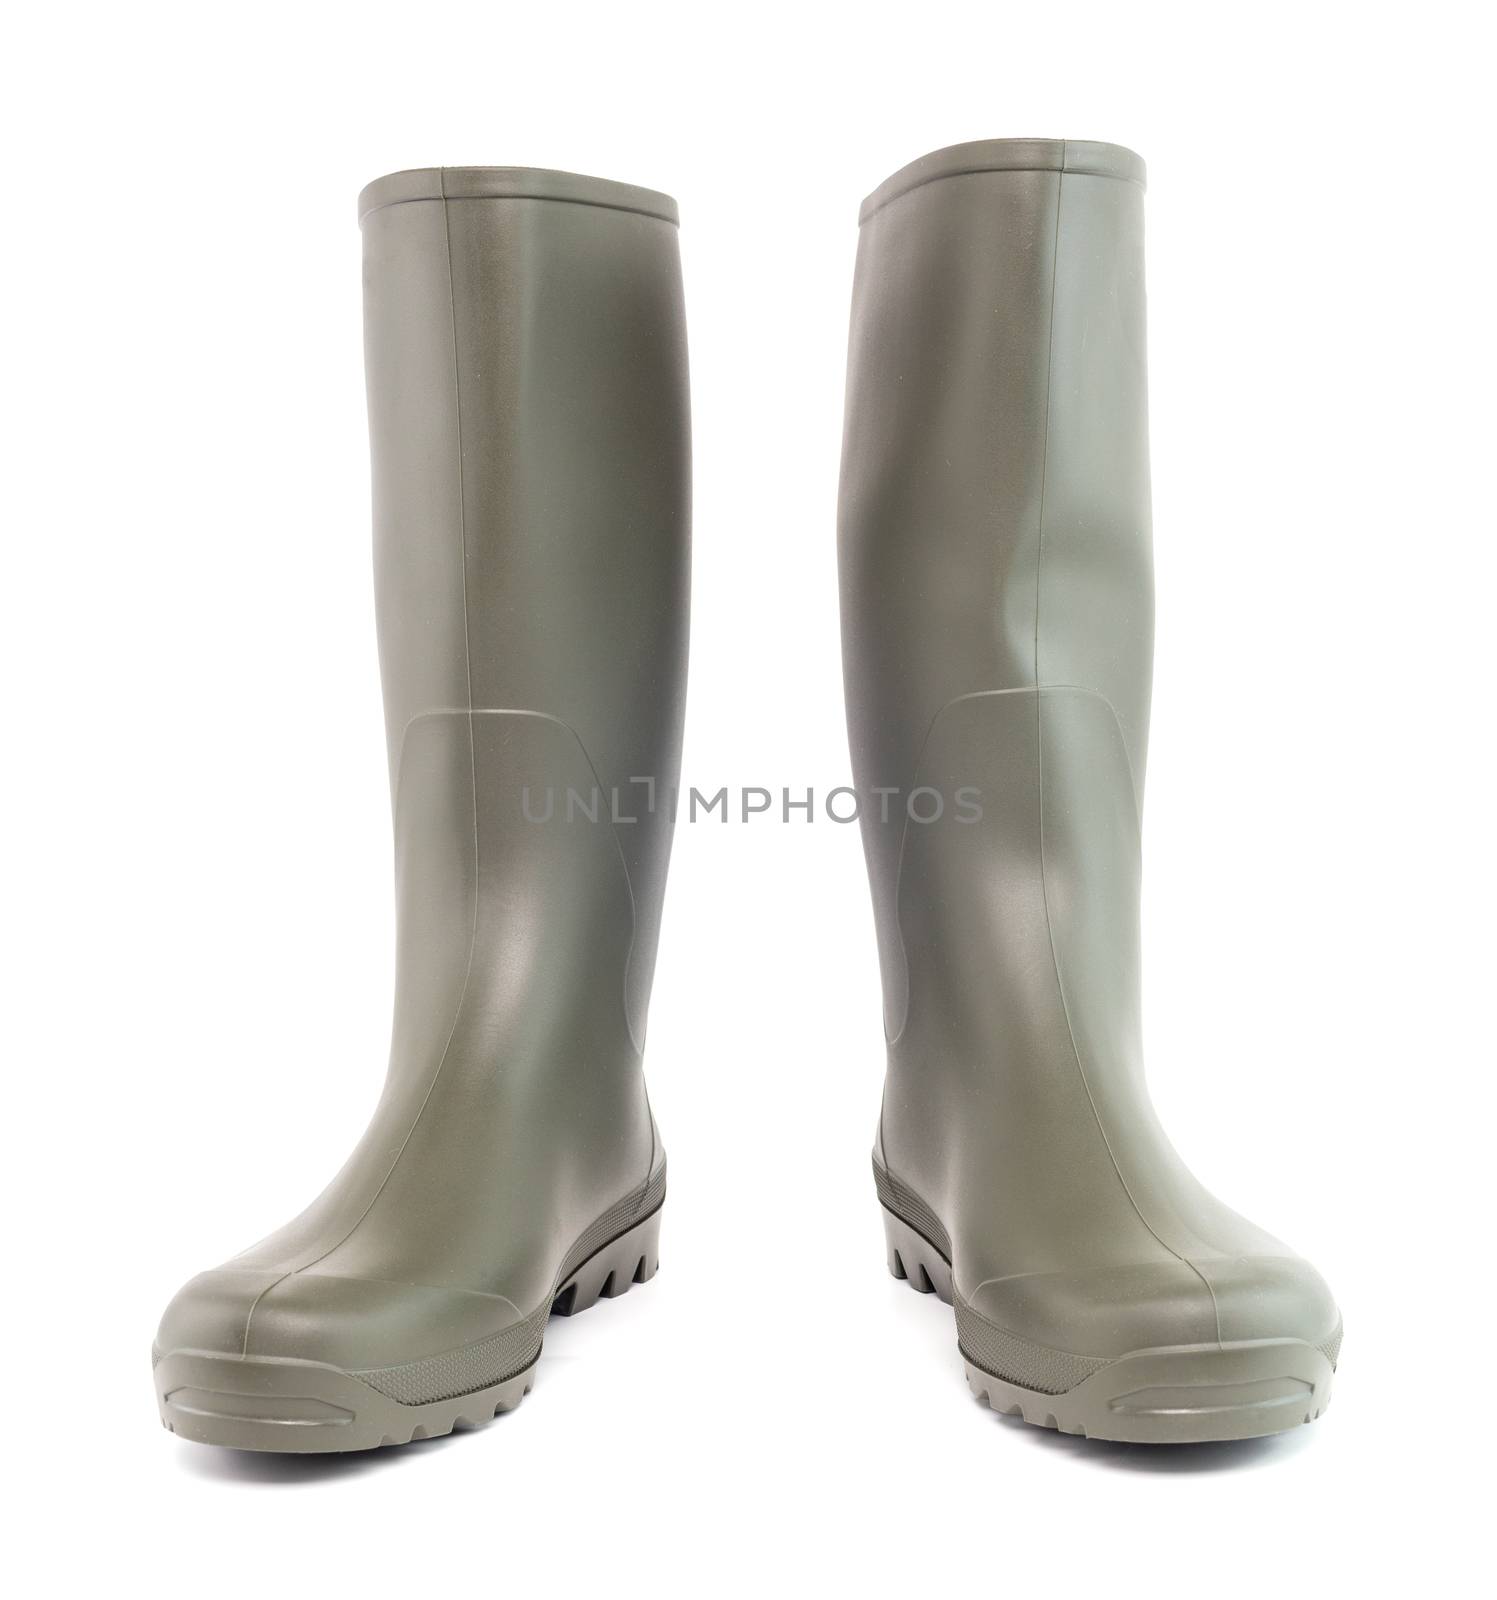 Pair of green clean rubber boots standing up, isolated on white background. Front view.